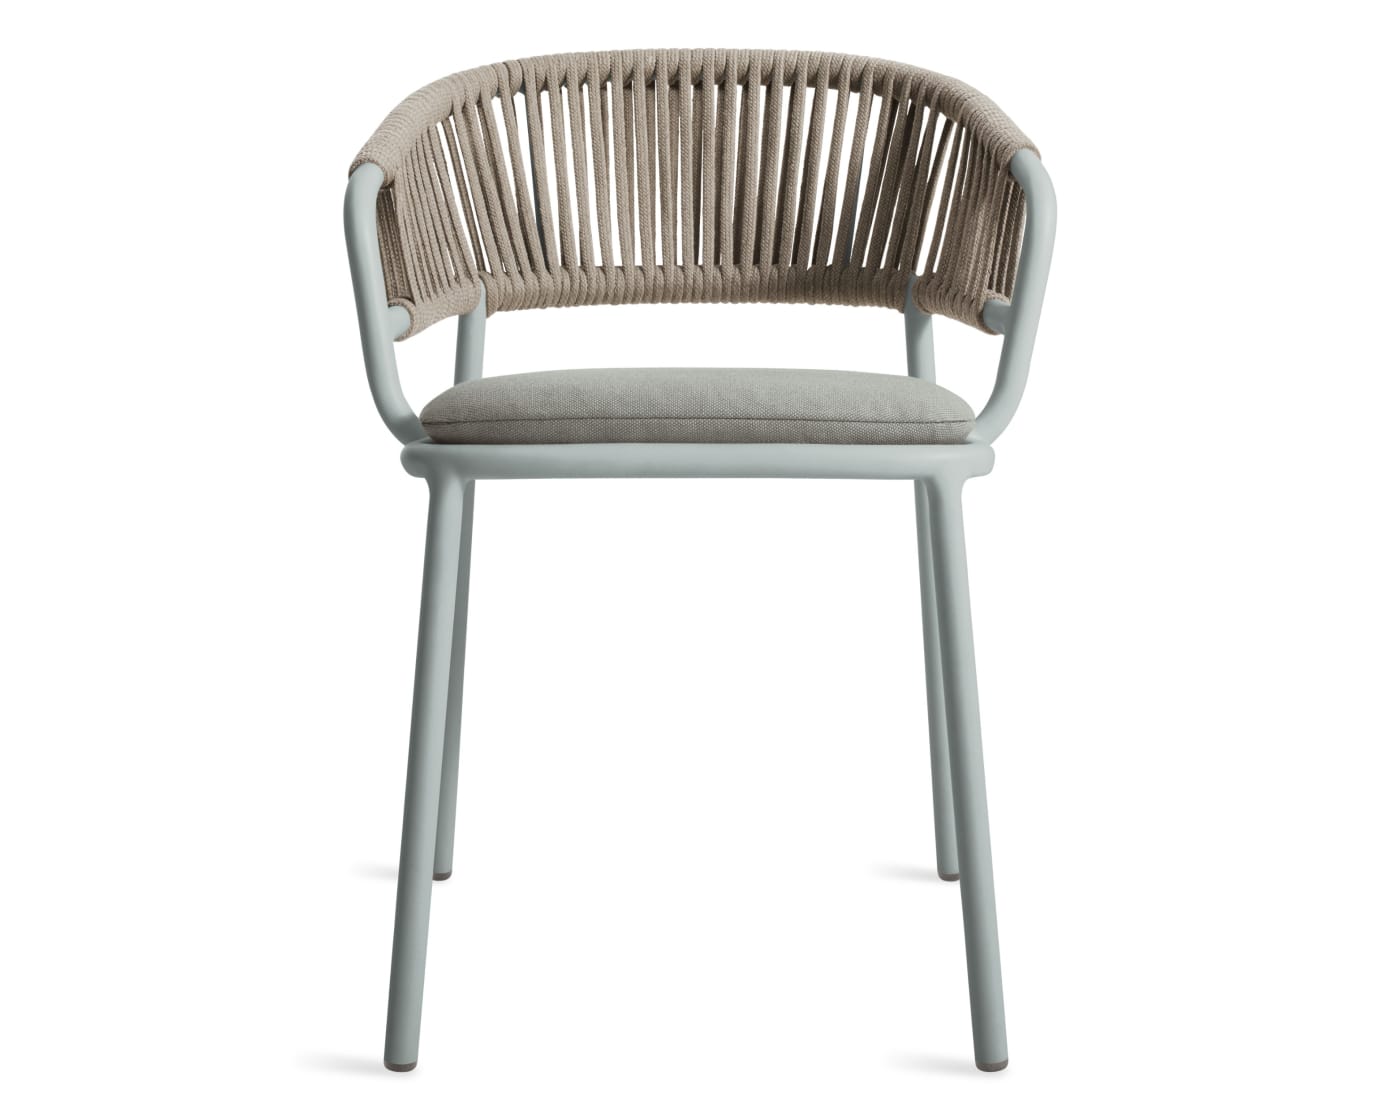 Mate Outdoor Dining Chair